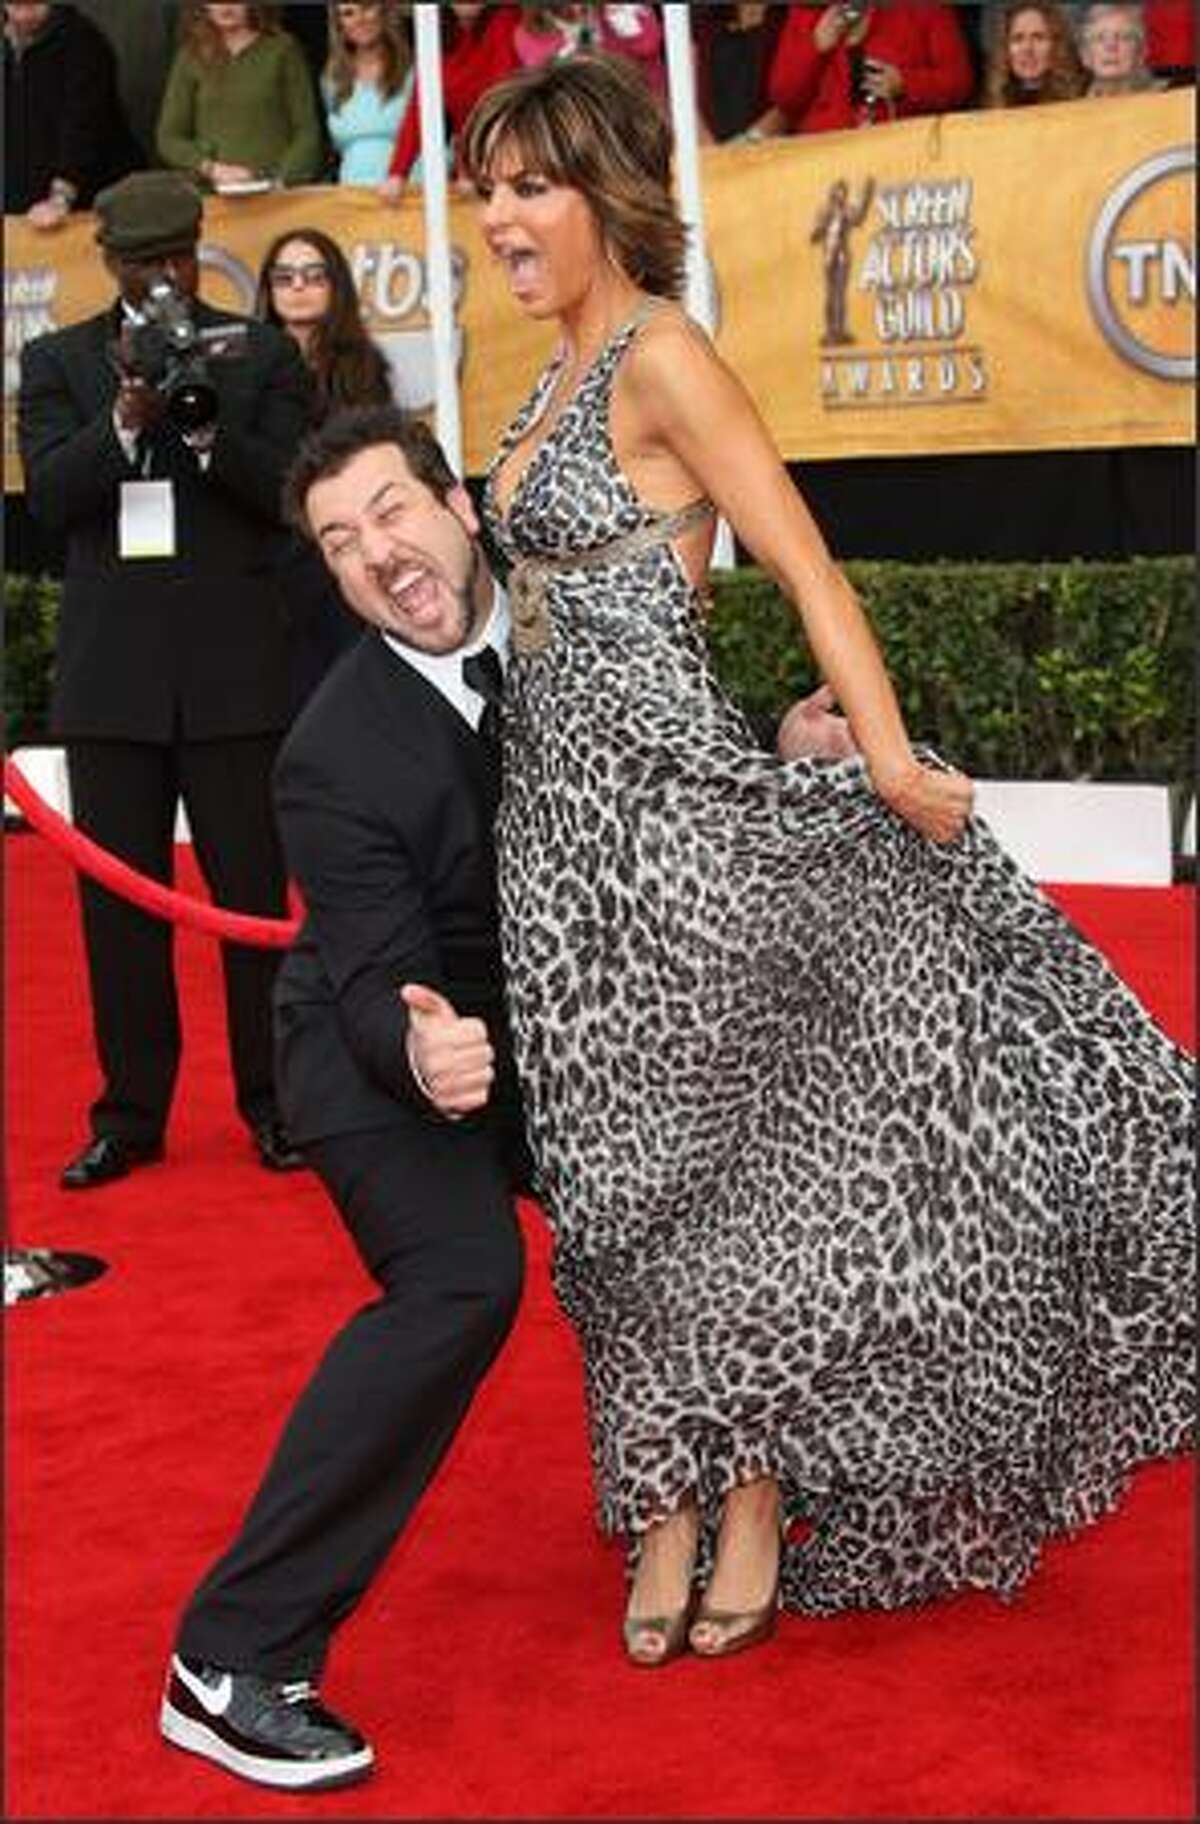 Actor Lisa Rinna and Joey Fatone arrive at the 14th annual Screen Actors Guild awards held at the Shrine Auditorium on January 27, 2008 in Los Angeles, Calif.